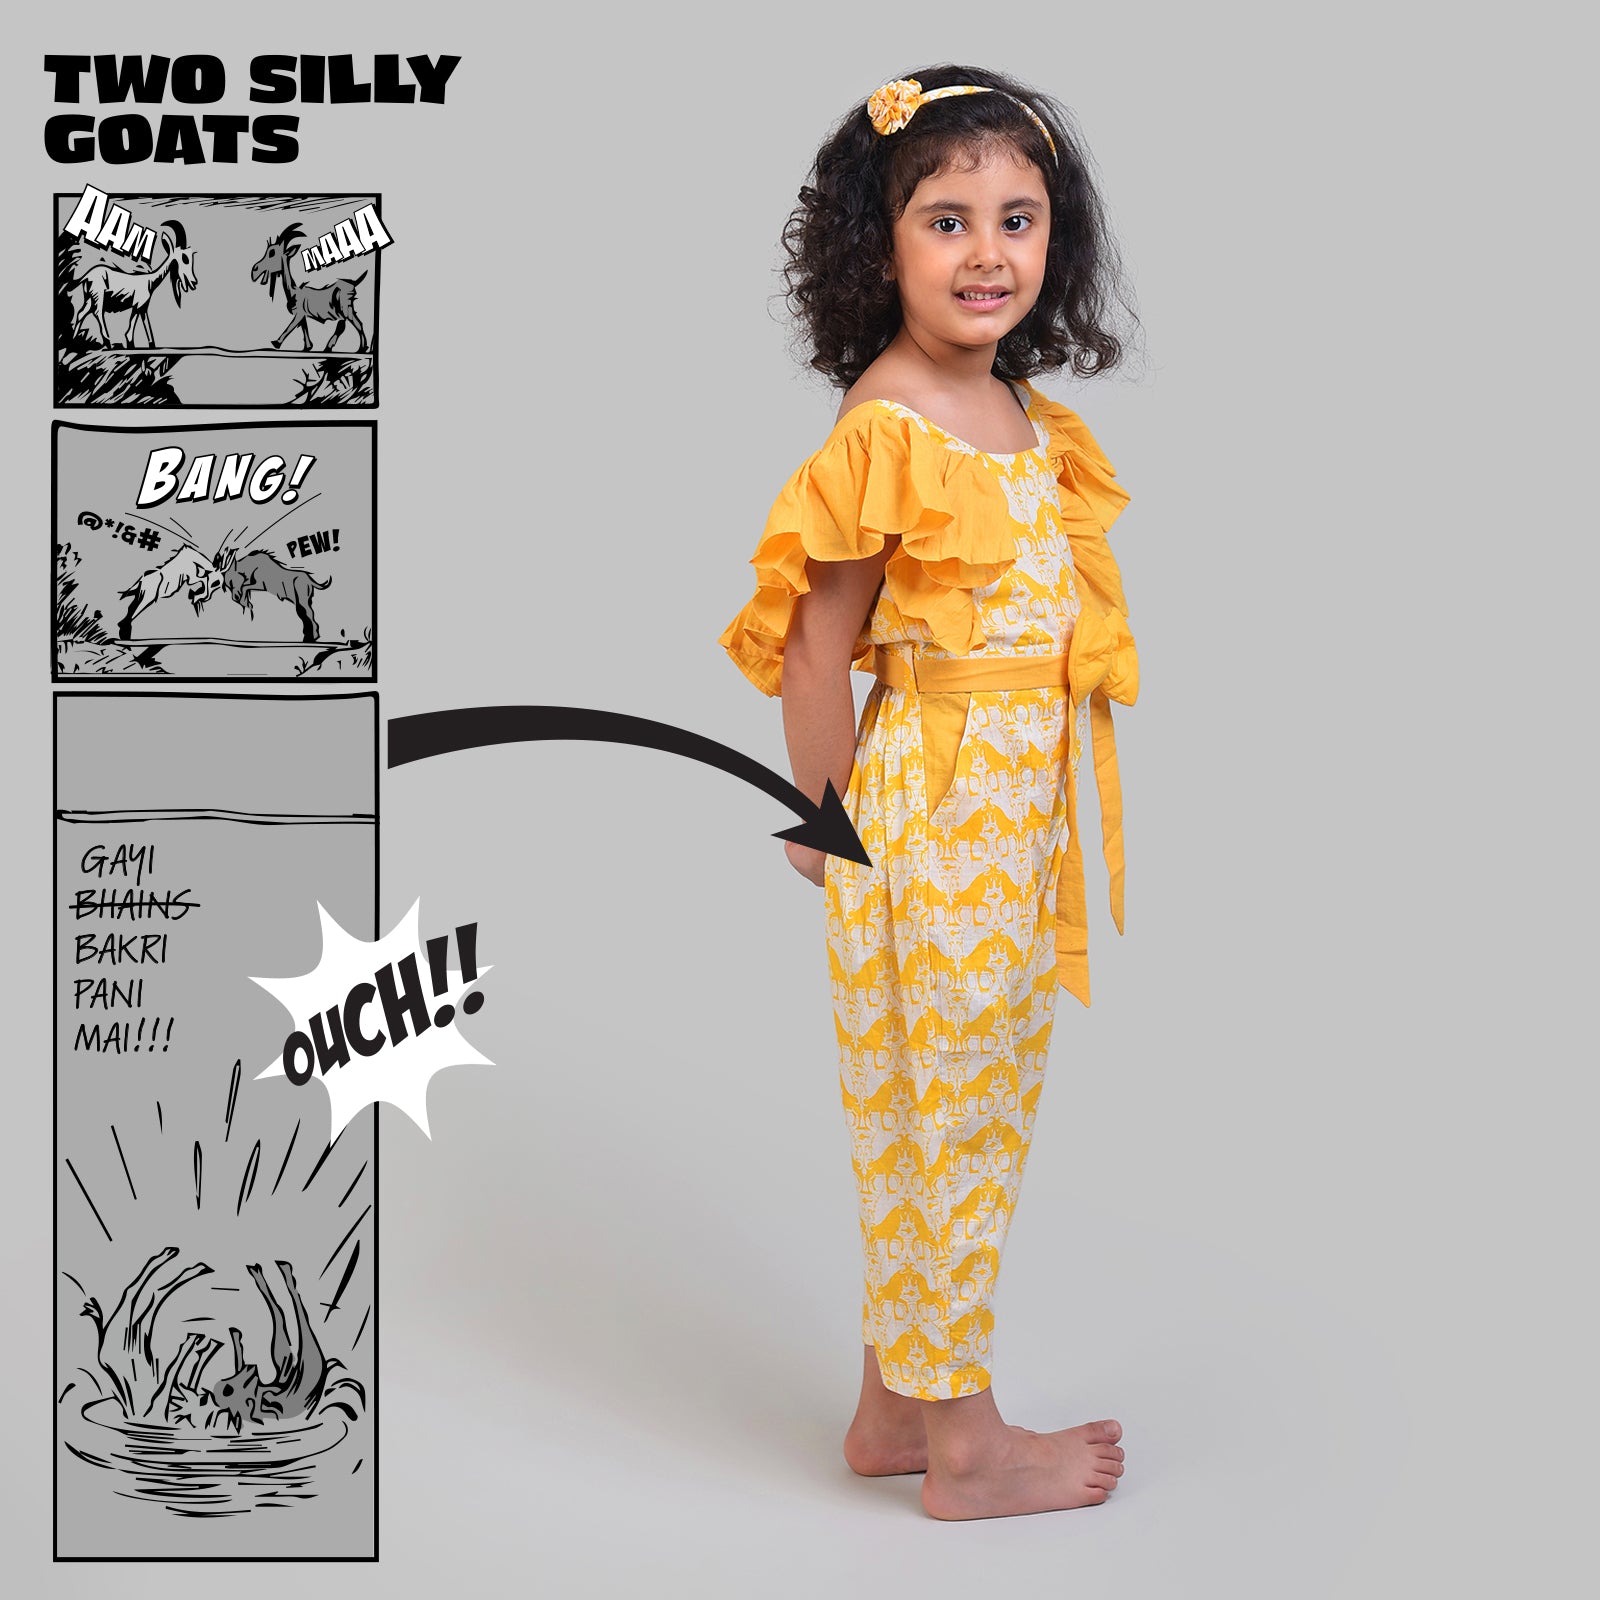 Cotton Jumpsuit For Girls with Two Silly Goats Print